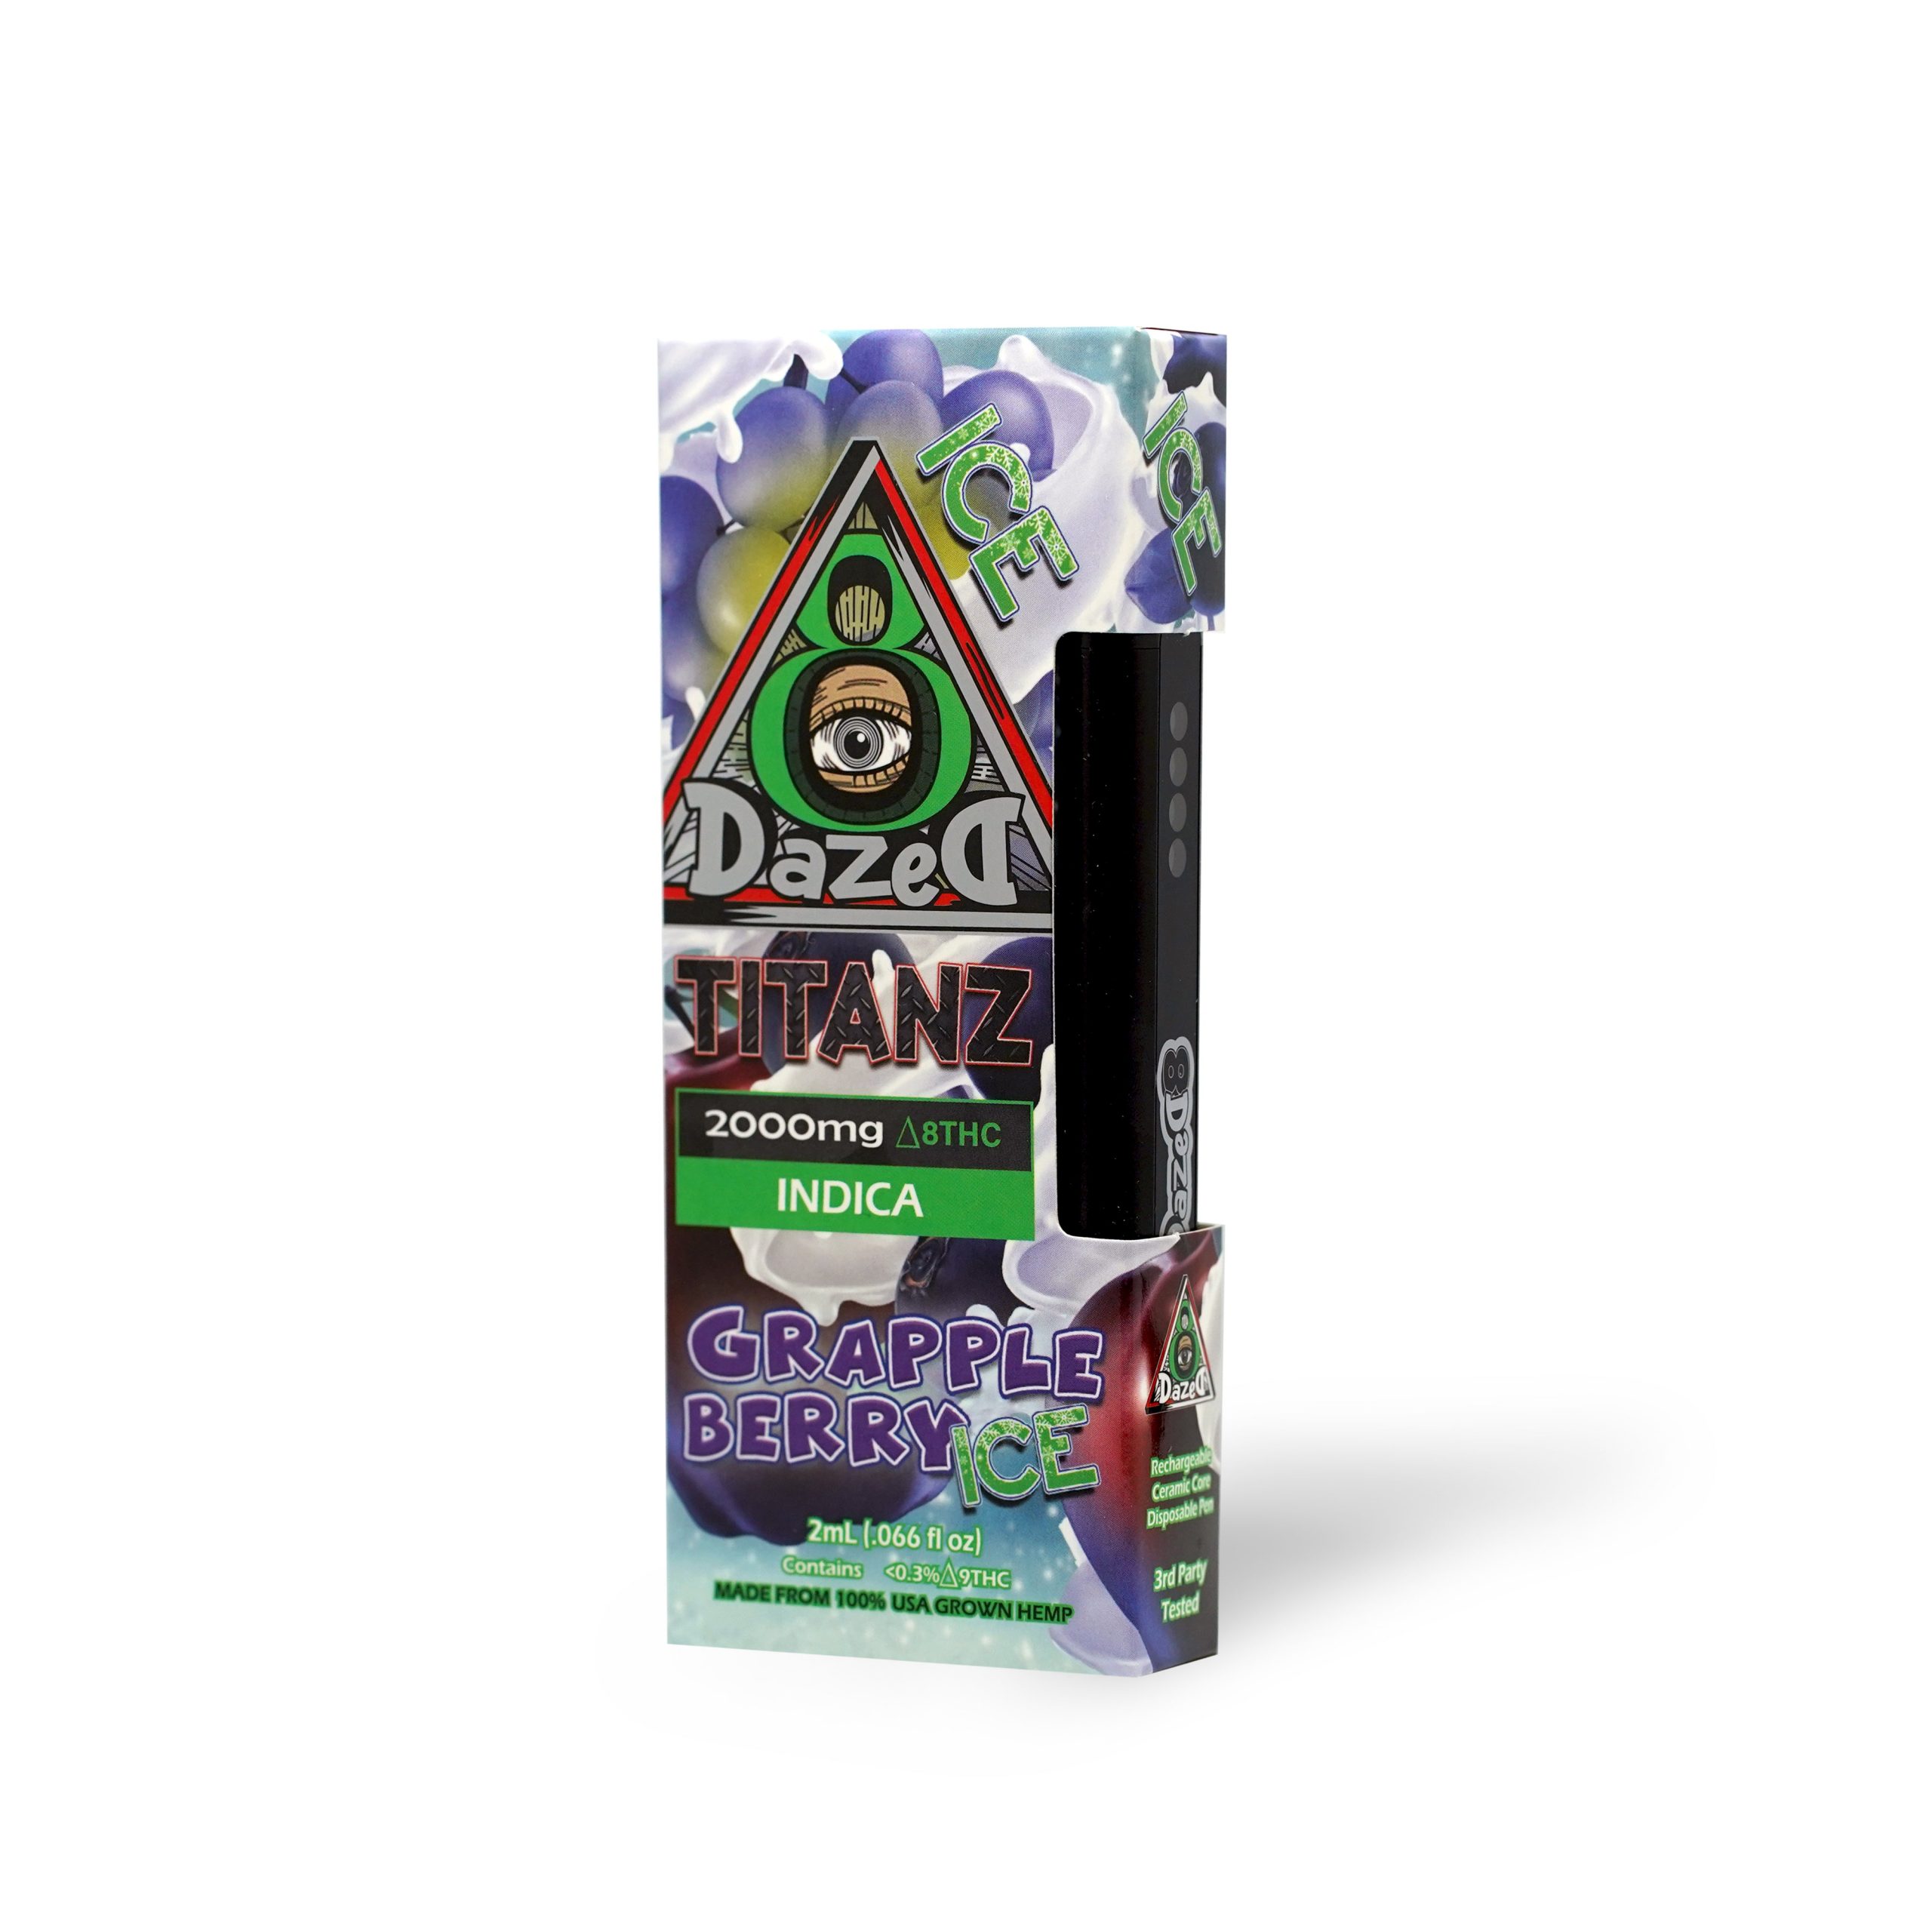 DazeD8 Grapple Berry Ice Delta 8 Disposable (2g) Best Price